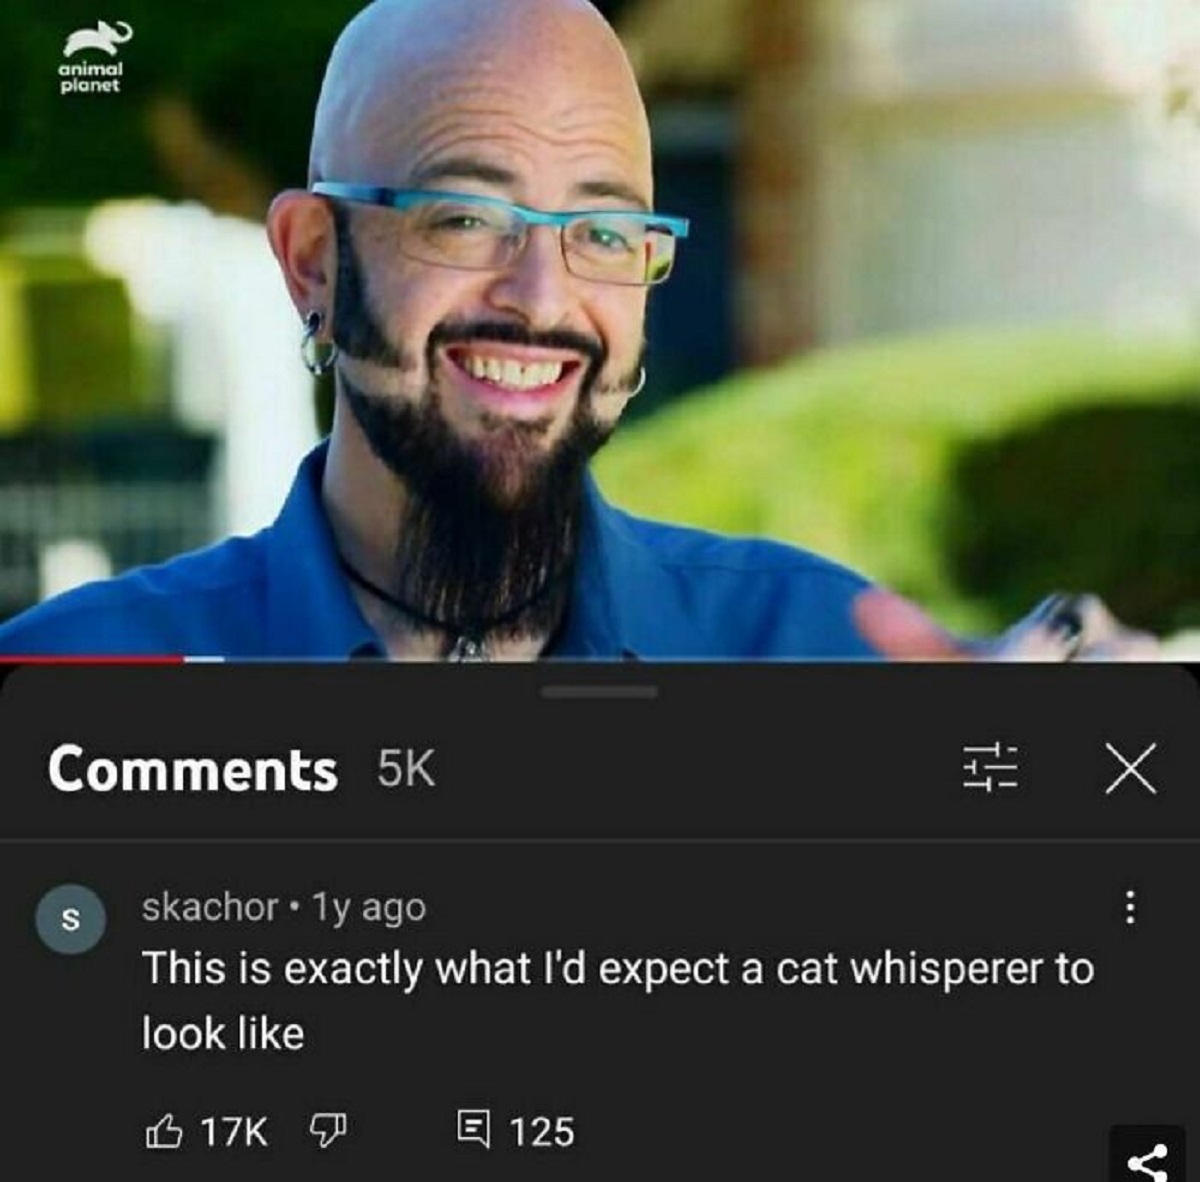 funny youtube comments - animal planet 5K S skachor 1y ago X This is exactly what I'd expect a cat whisperer to look 17K 125